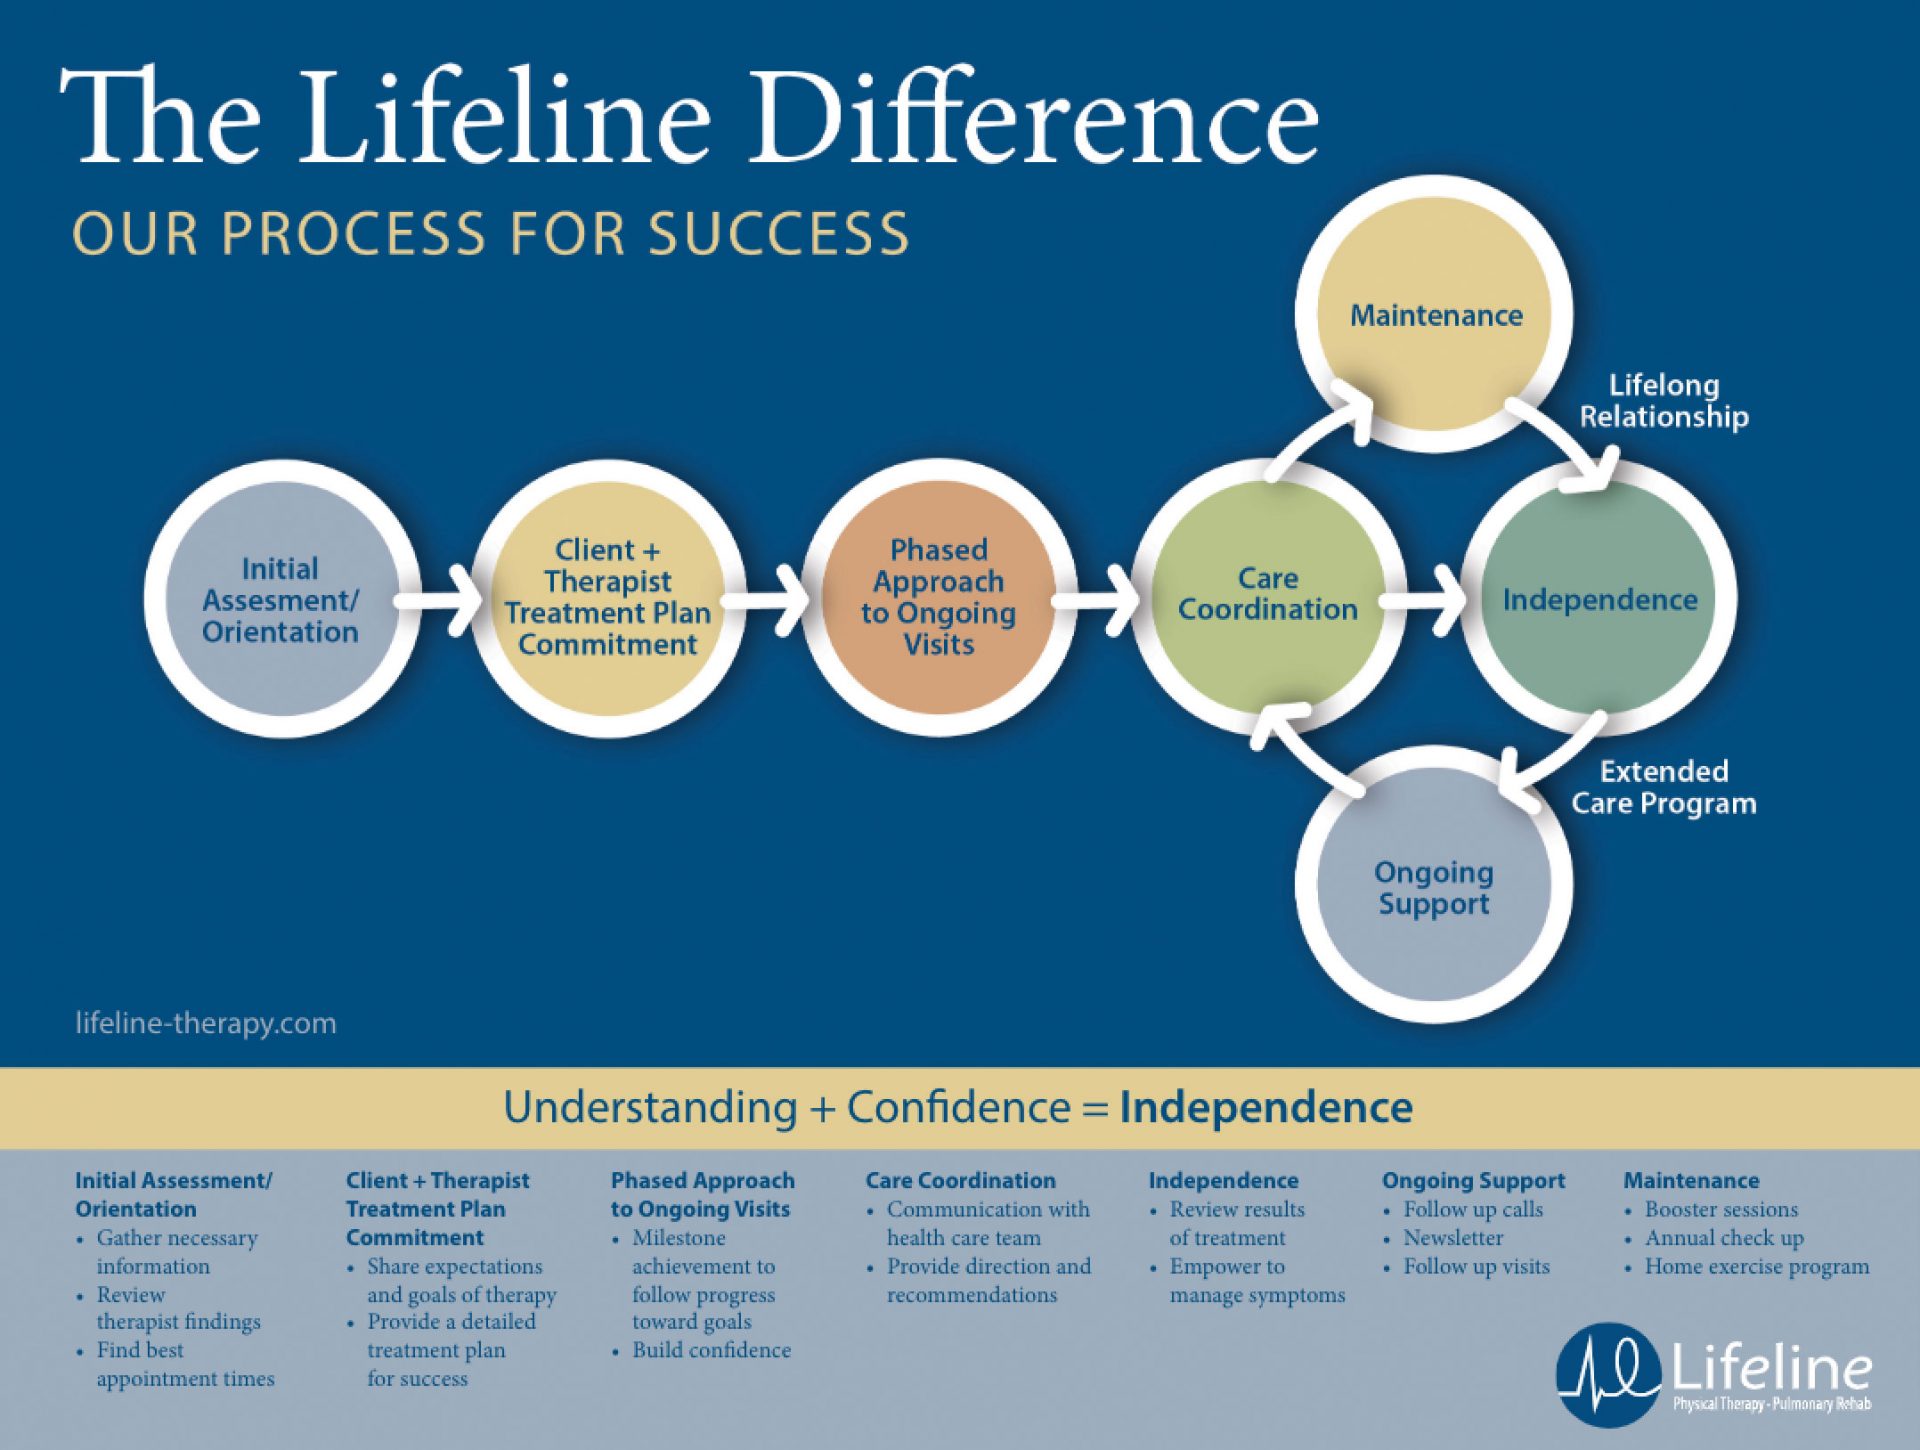 Our Process for Success